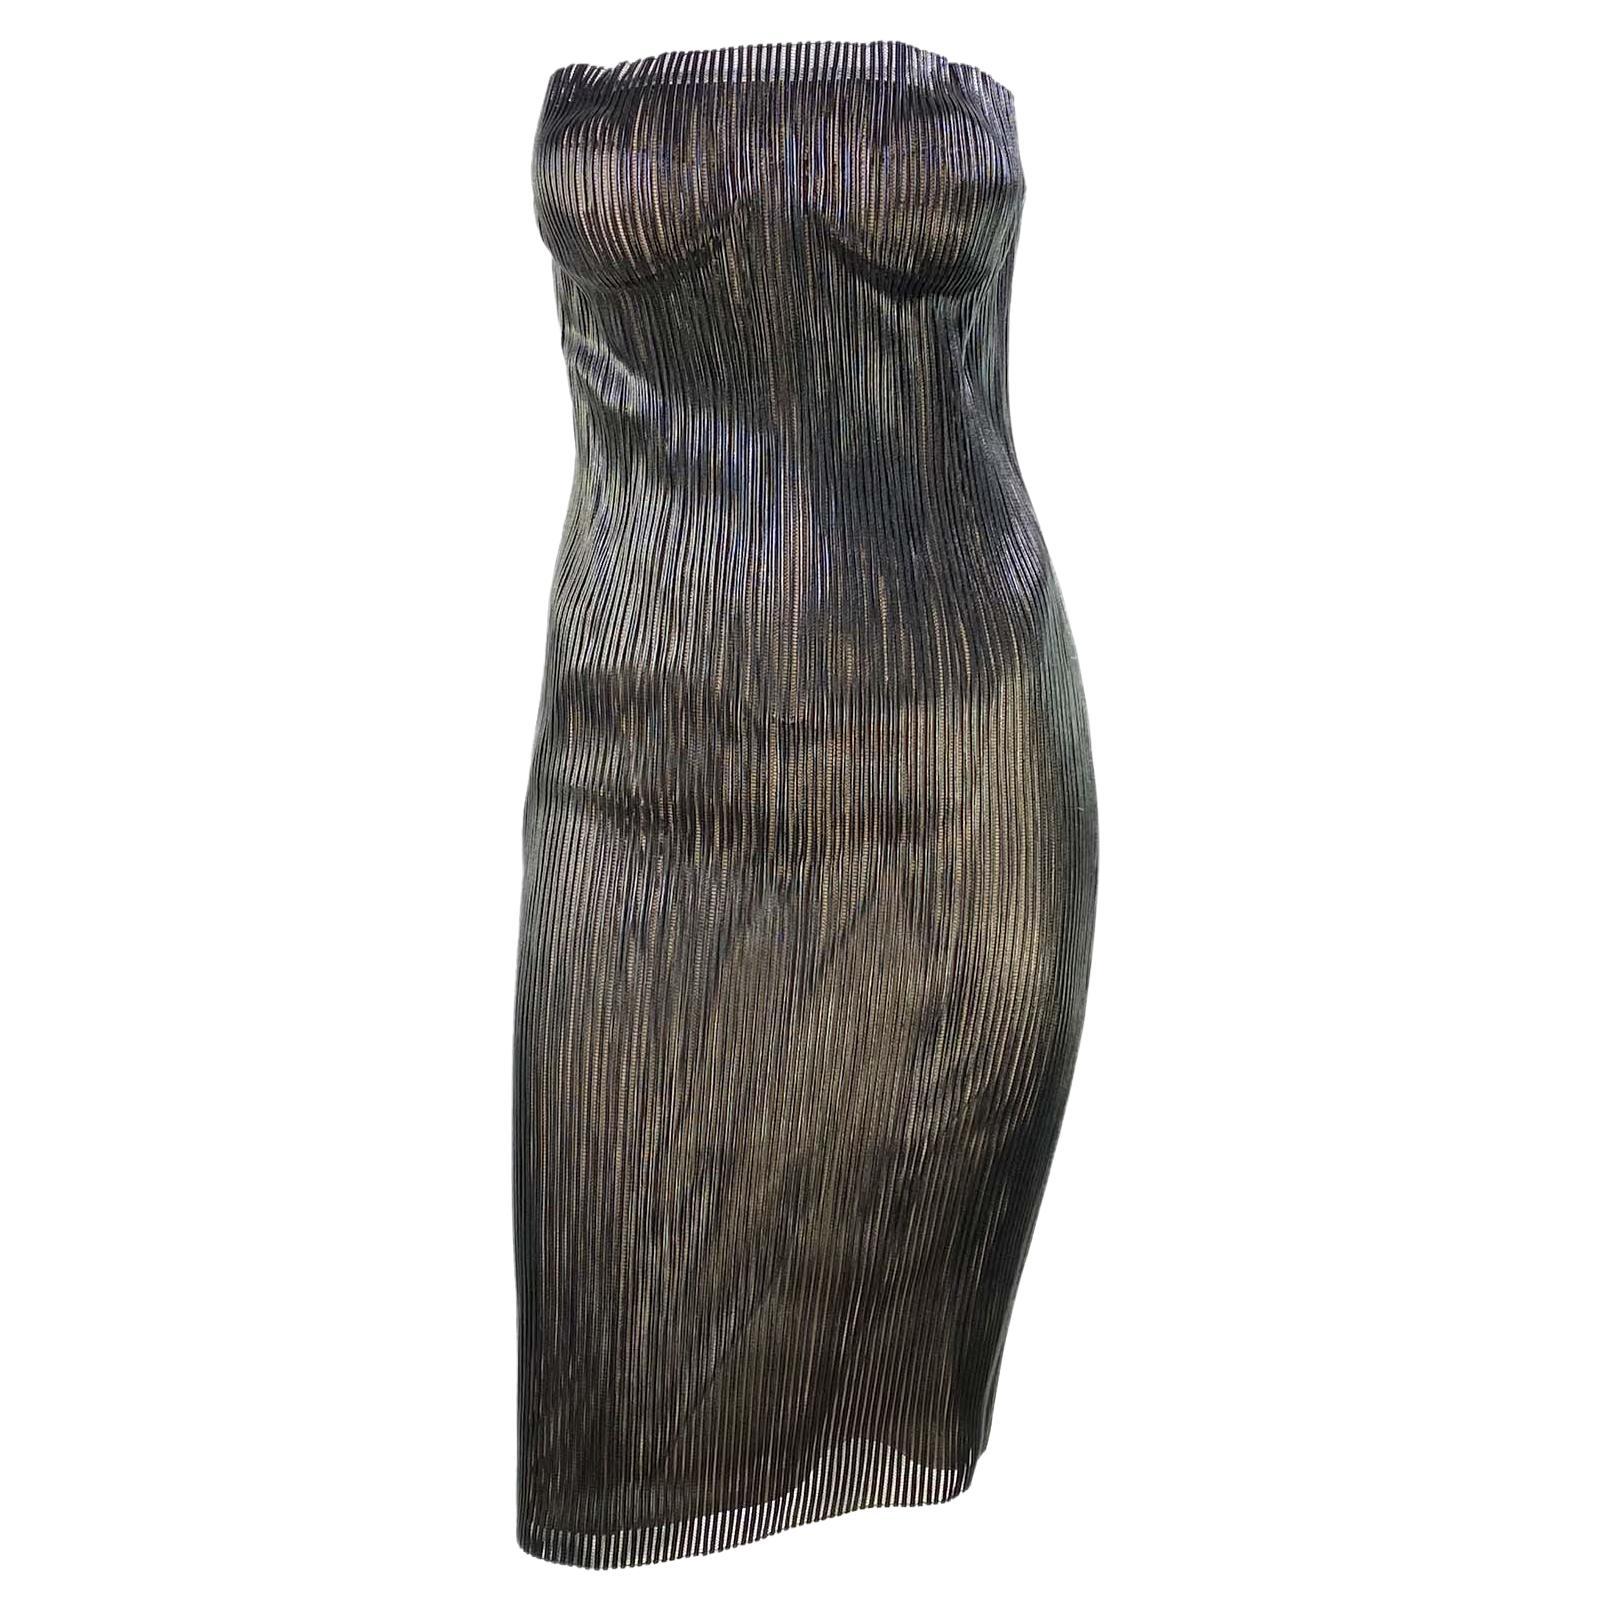 NWT S/S 2001 Gucci by Tom Ford Leather Mesh Corset Runway Tube Dress en vente